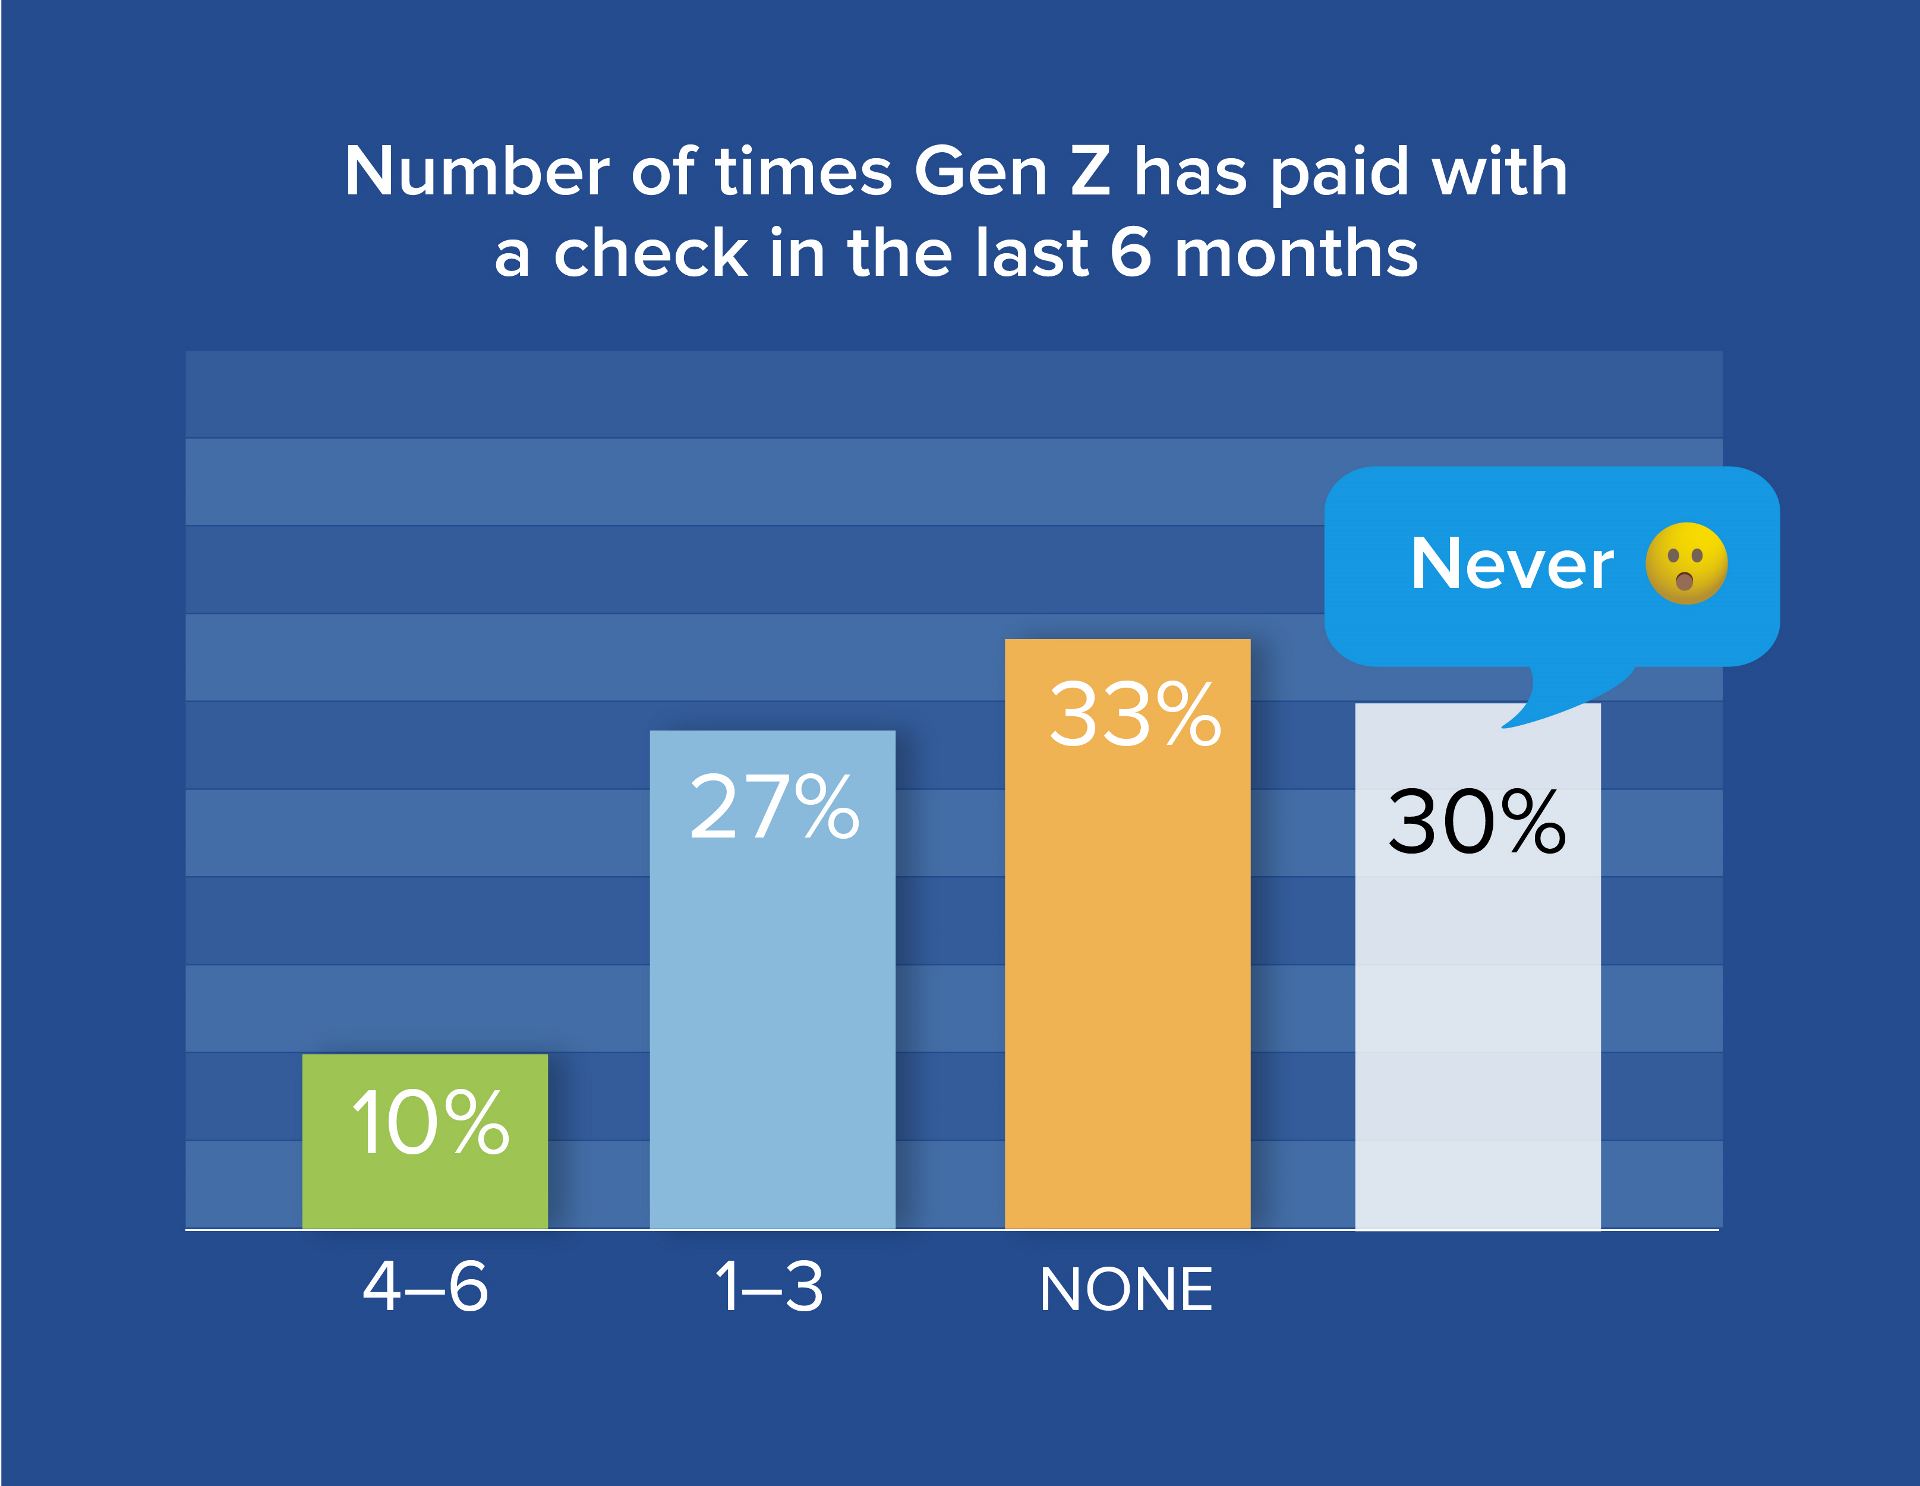 graph showing the percentage of times gen z has paid a check in the last 6 months, 30% never paying